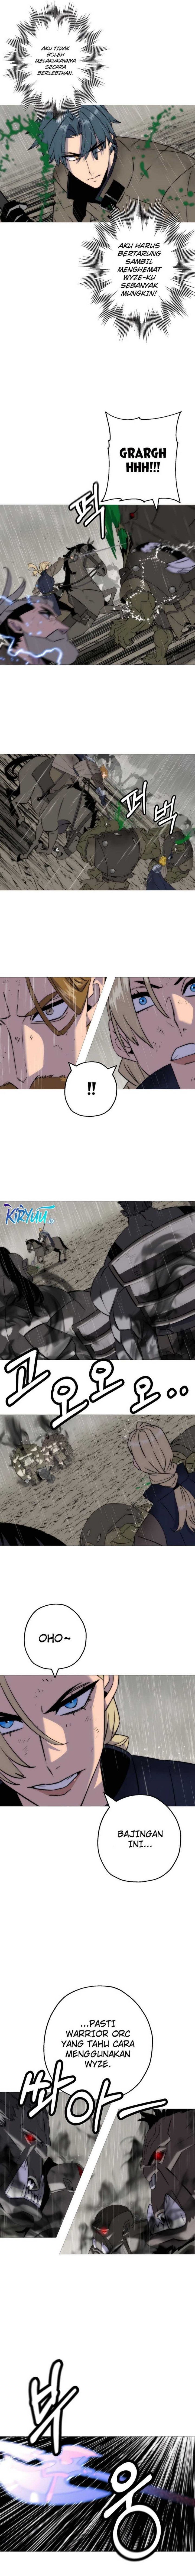 Dilarang COPAS - situs resmi www.mangacanblog.com - Komik the story of a low rank soldier becoming a monarch 110 - chapter 110 111 Indonesia the story of a low rank soldier becoming a monarch 110 - chapter 110 Terbaru 4|Baca Manga Komik Indonesia|Mangacan